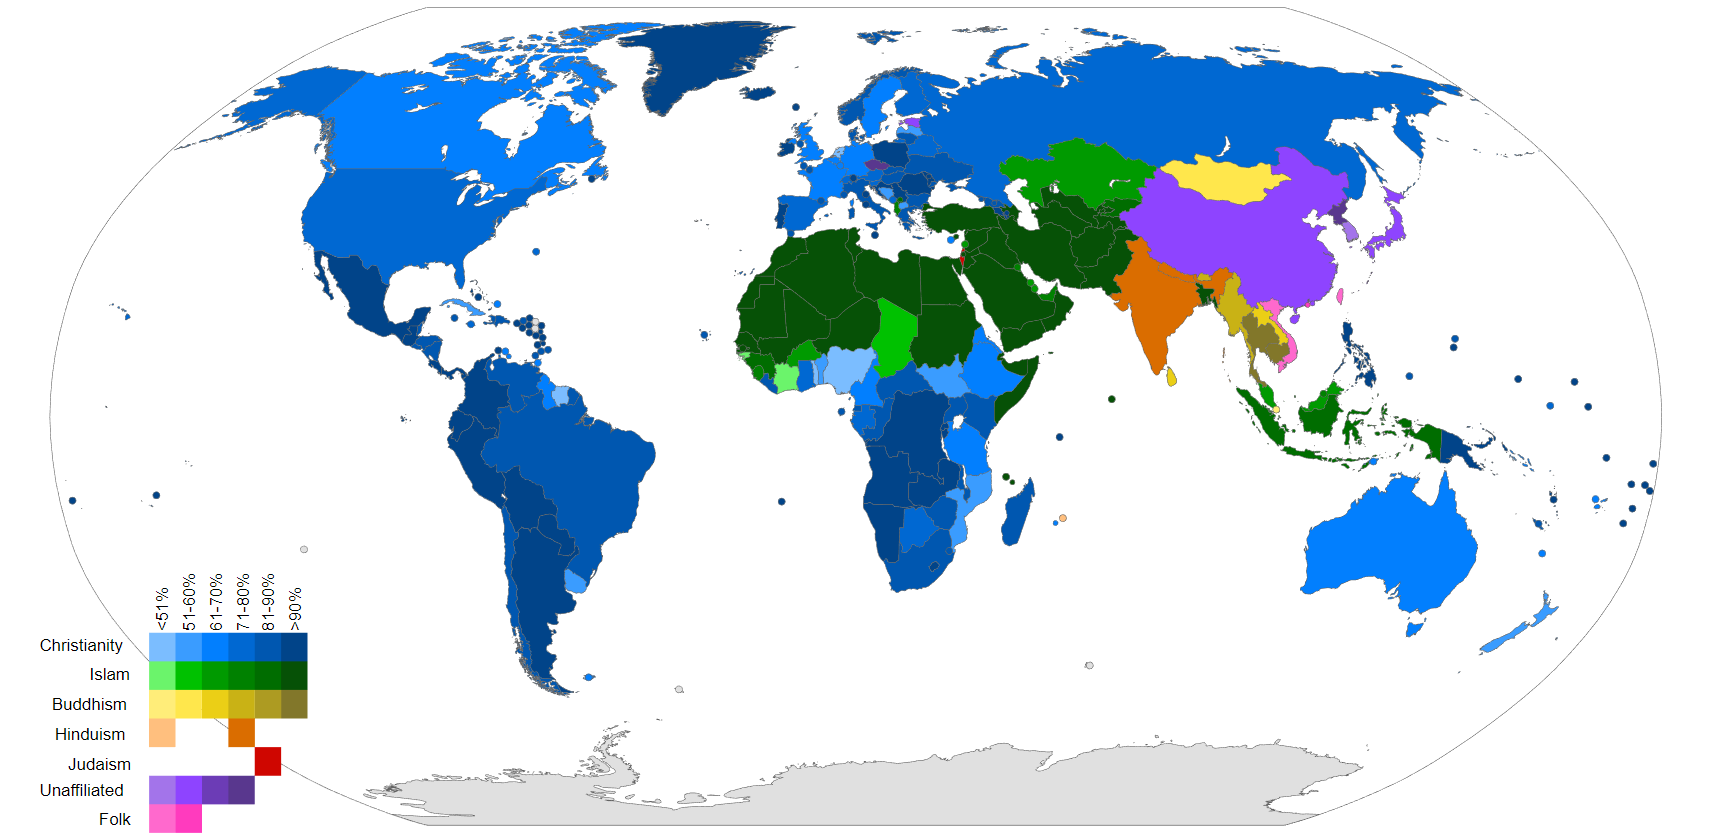 This map shows the religion or lack-thereof practiced by the majority of persons in each country according to the Pew Research Center's 2010 study The Future of World Religions: Population Growth Projections, 2010-2050.